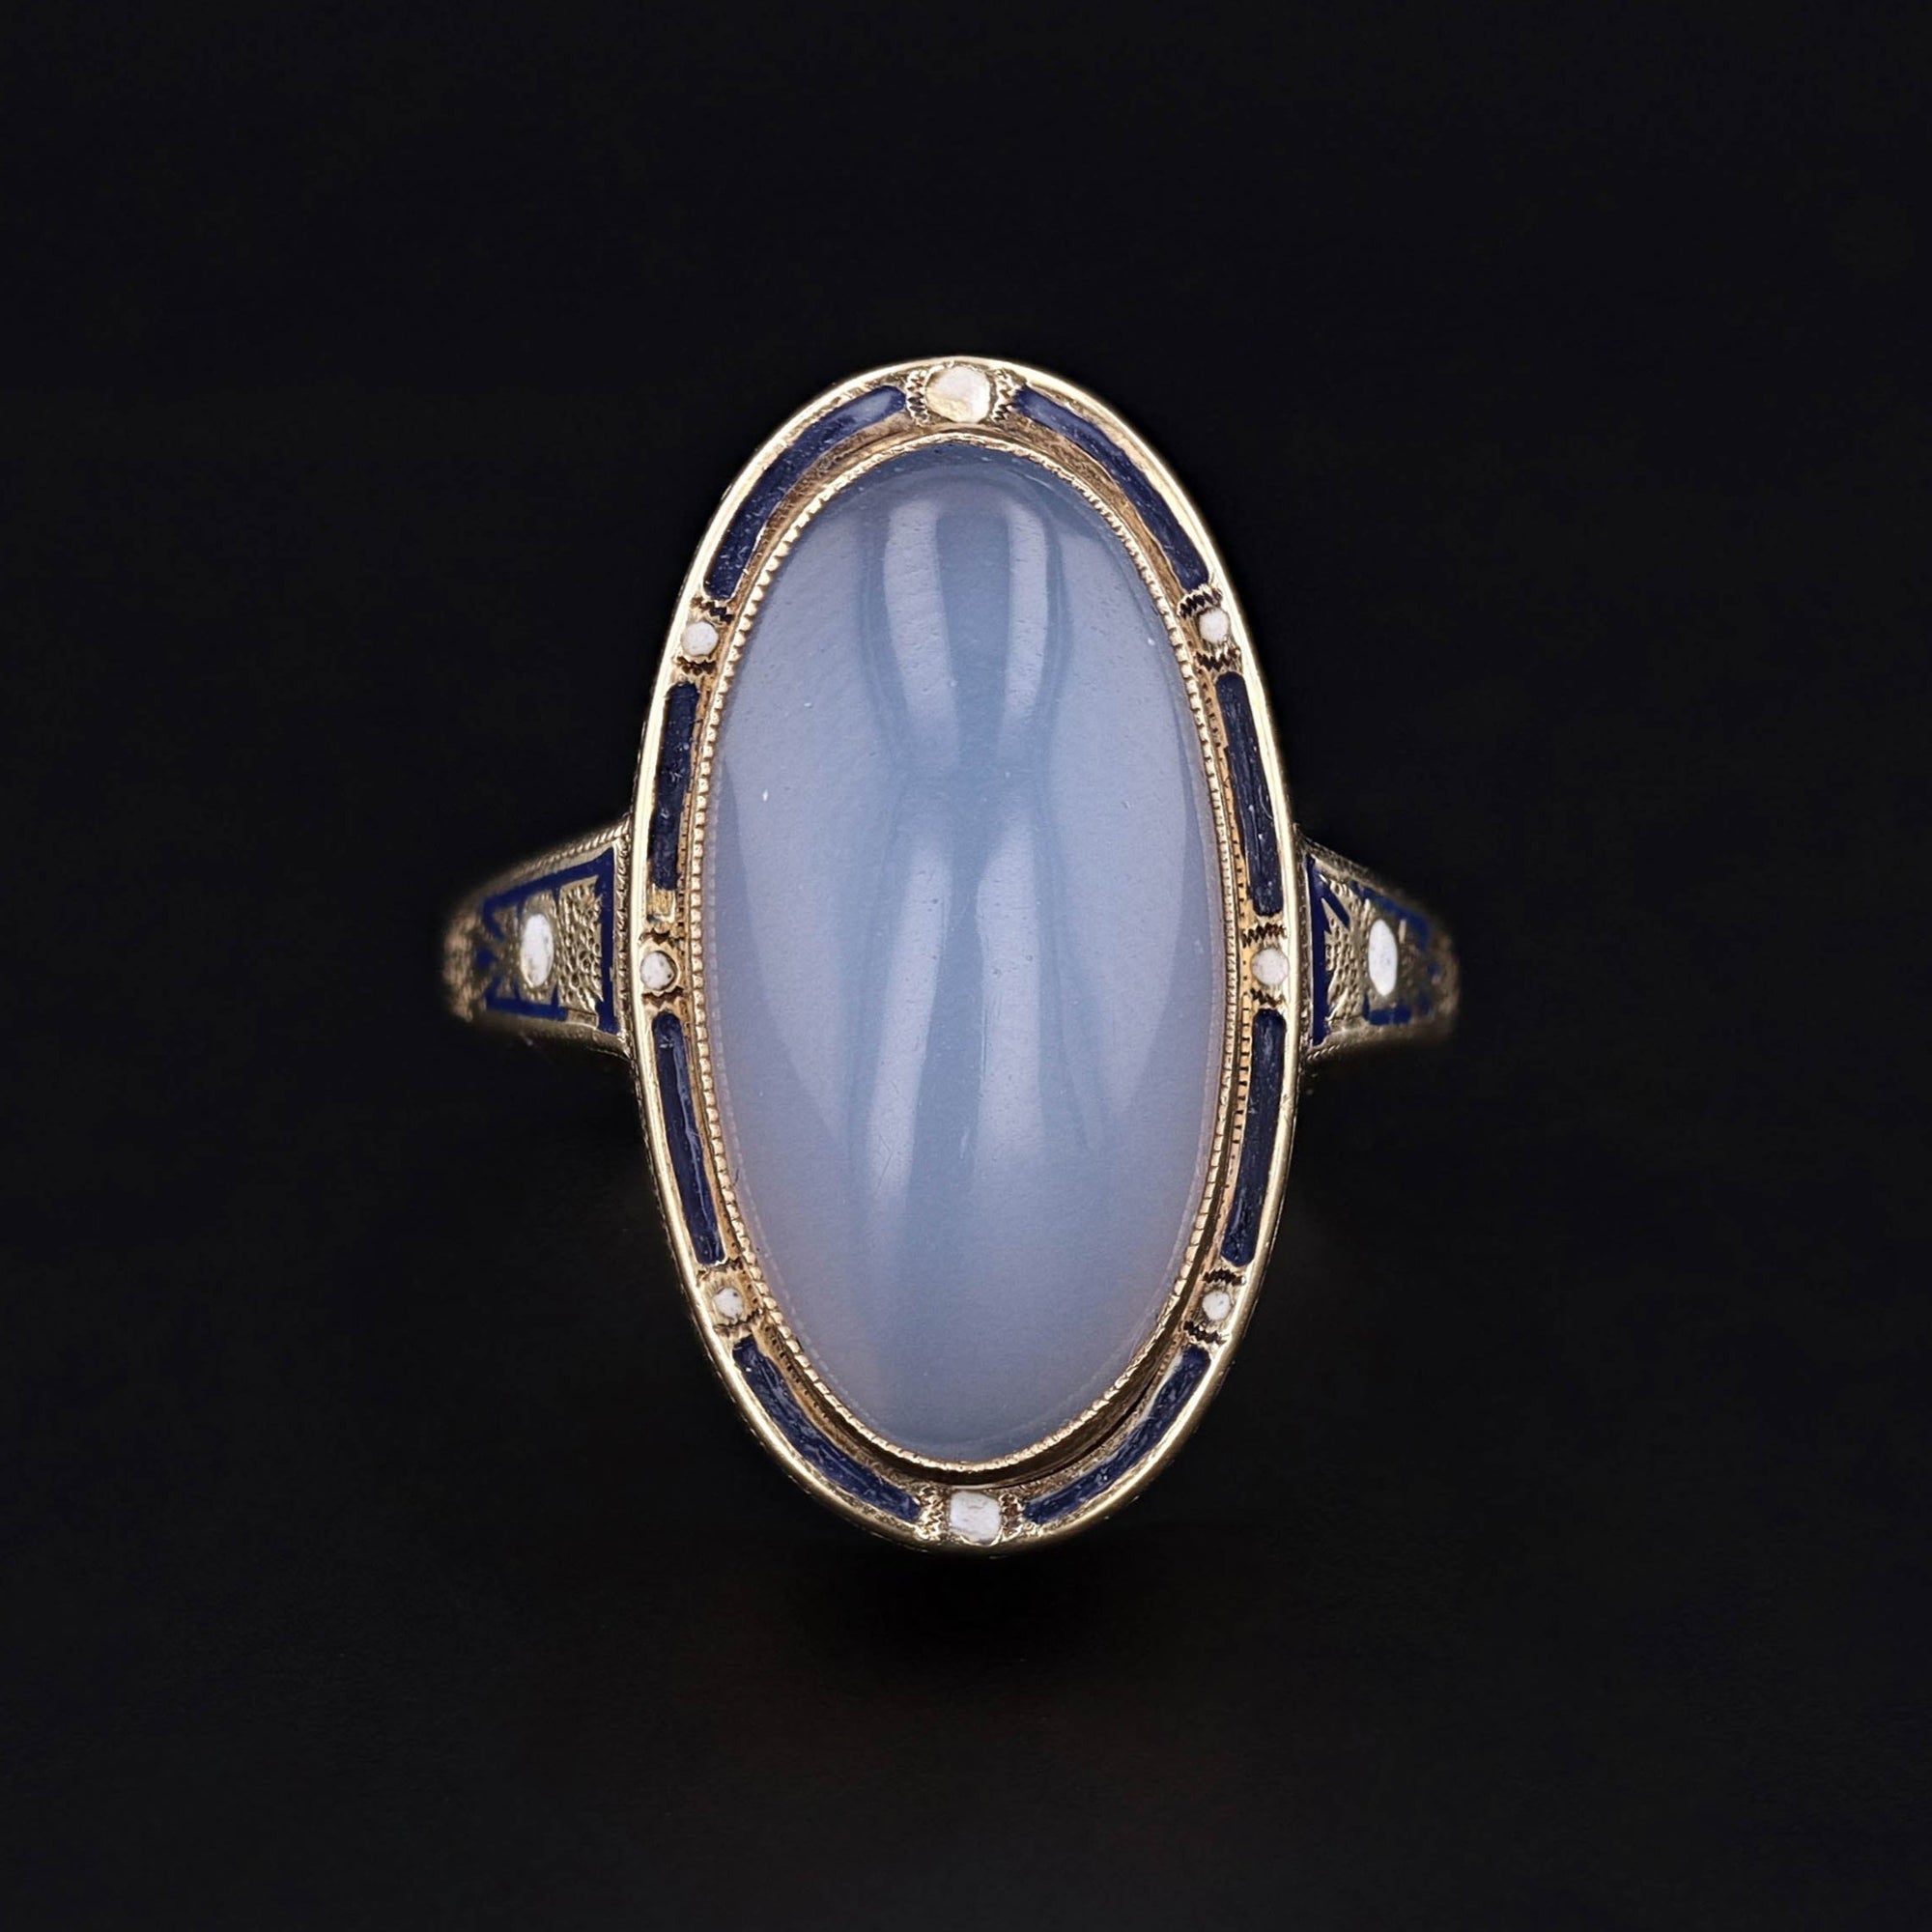 Antique Chalcedony and Enamel Ring of 14k Gold